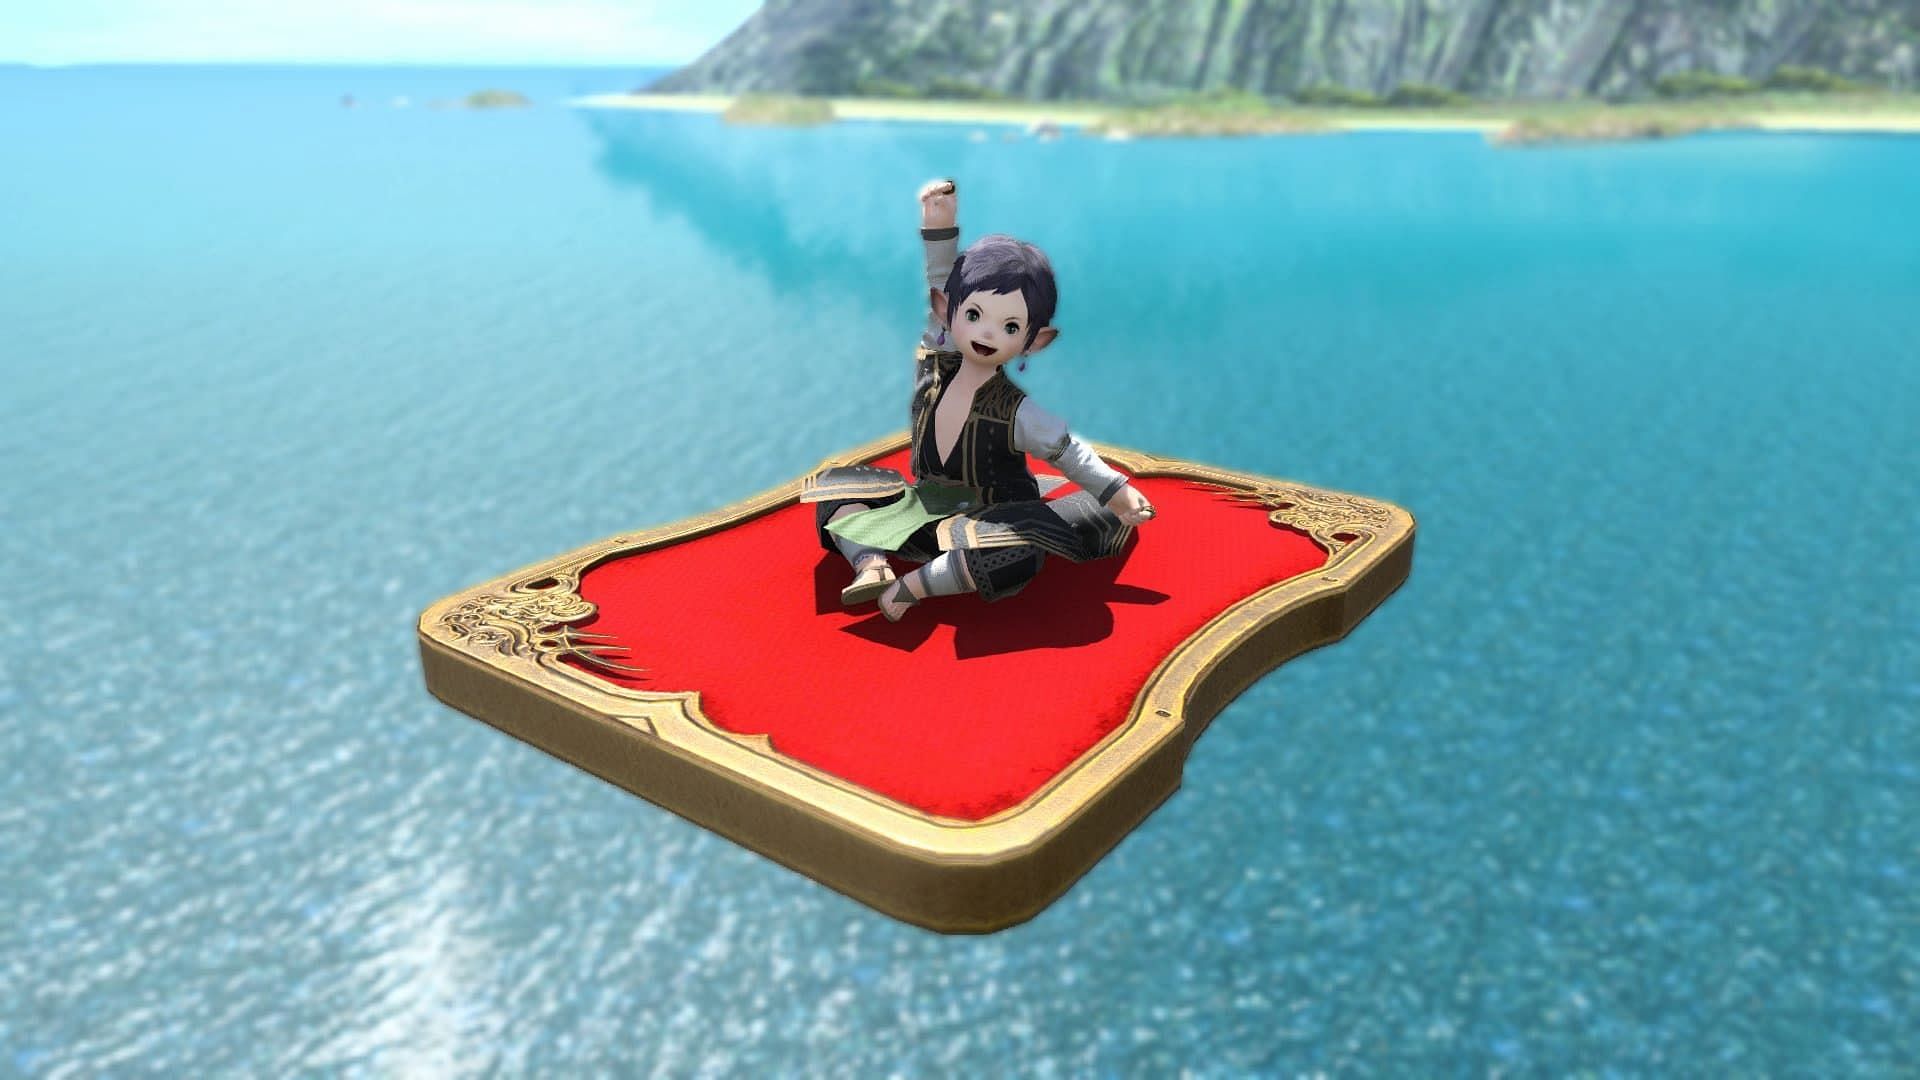 A Lalafell riding the Magicked Card mount in Final Fantasy 14